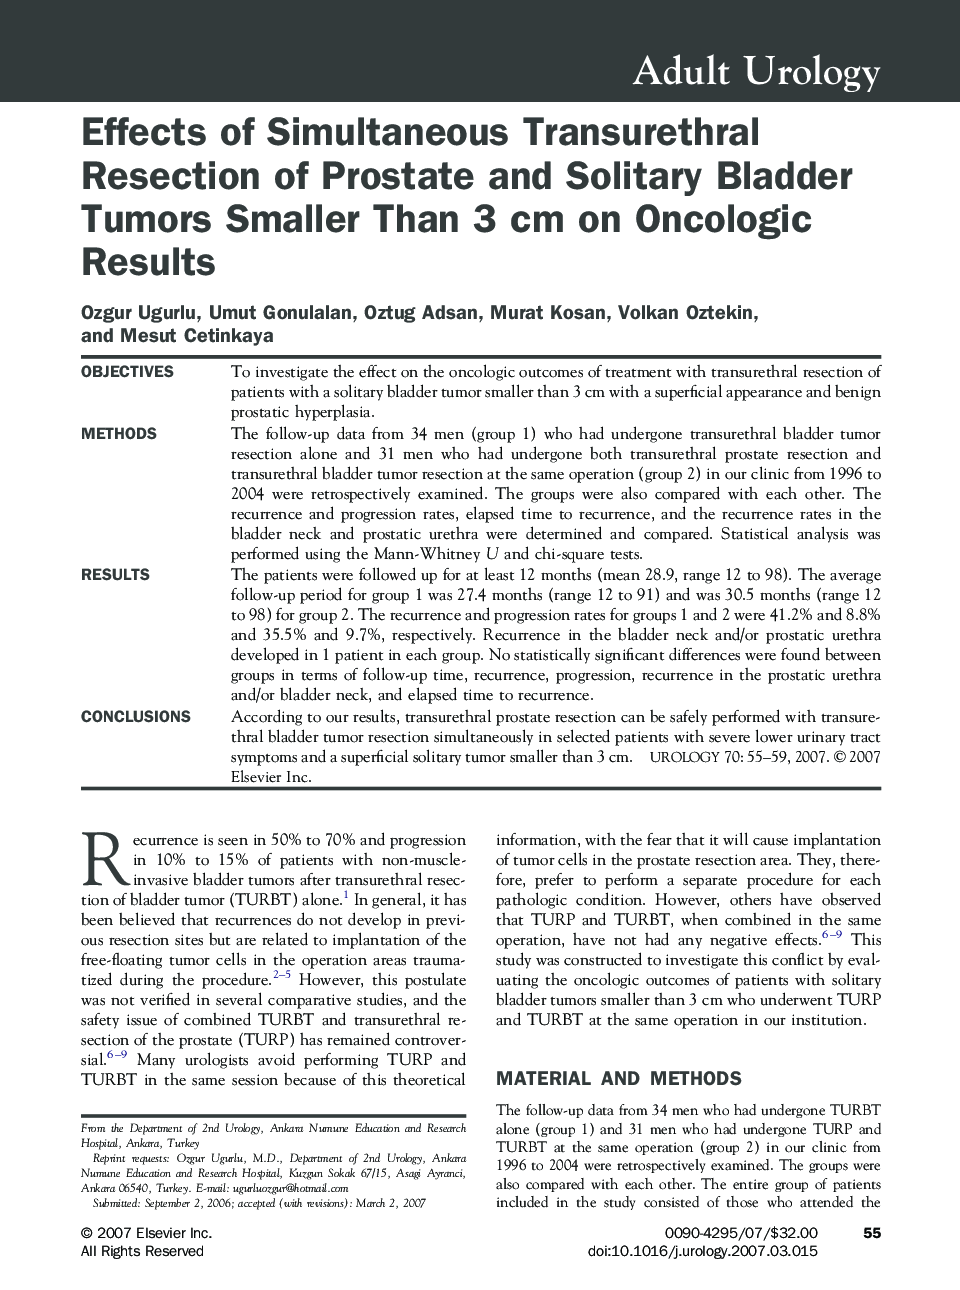 Effects of Simultaneous Transurethral Resection of Prostate and Solitary Bladder Tumors Smaller Than 3 cm on Oncologic Results